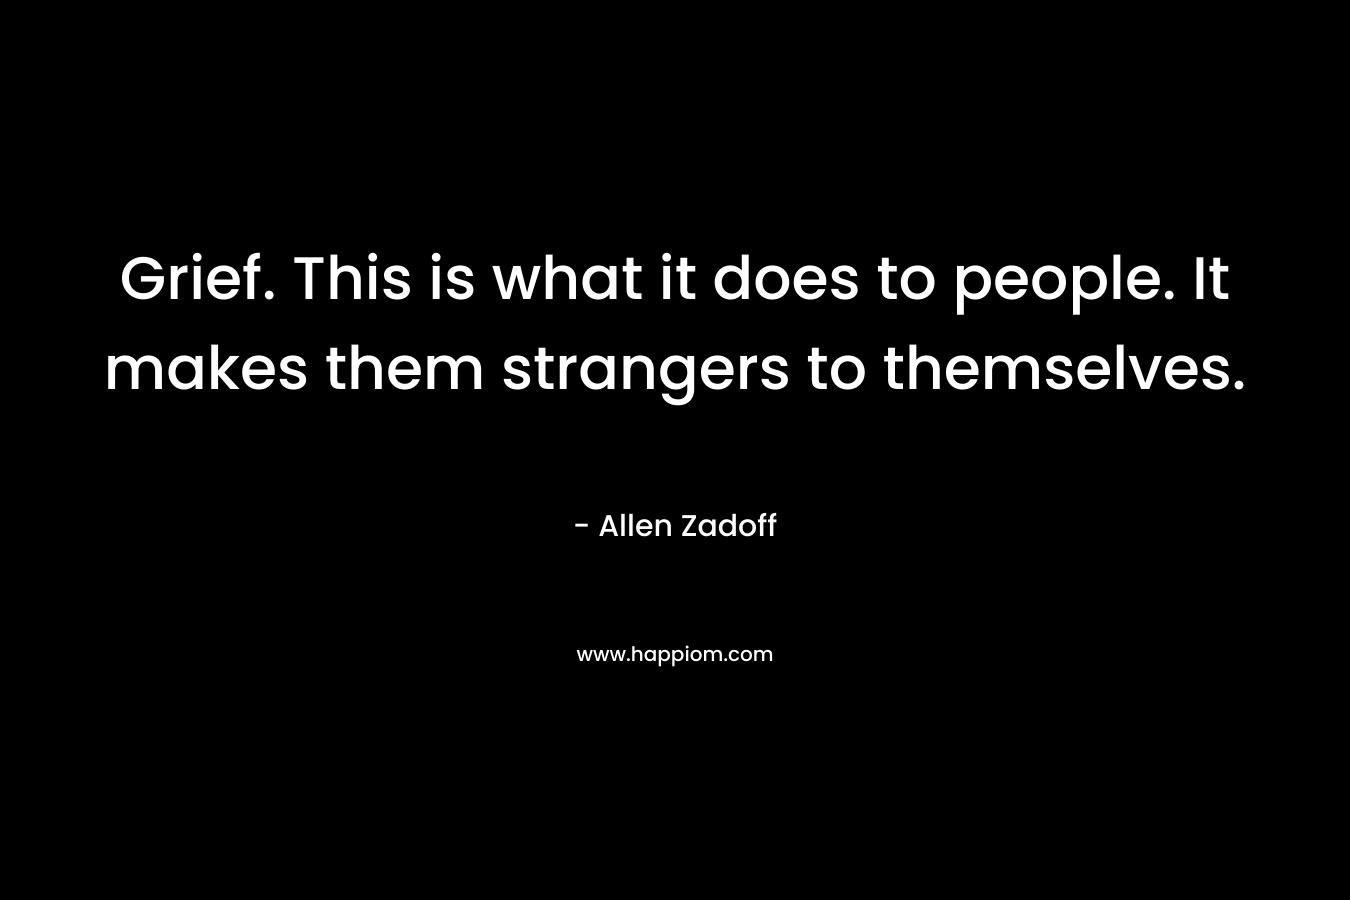 Grief. This is what it does to people. It makes them strangers to themselves. – Allen Zadoff